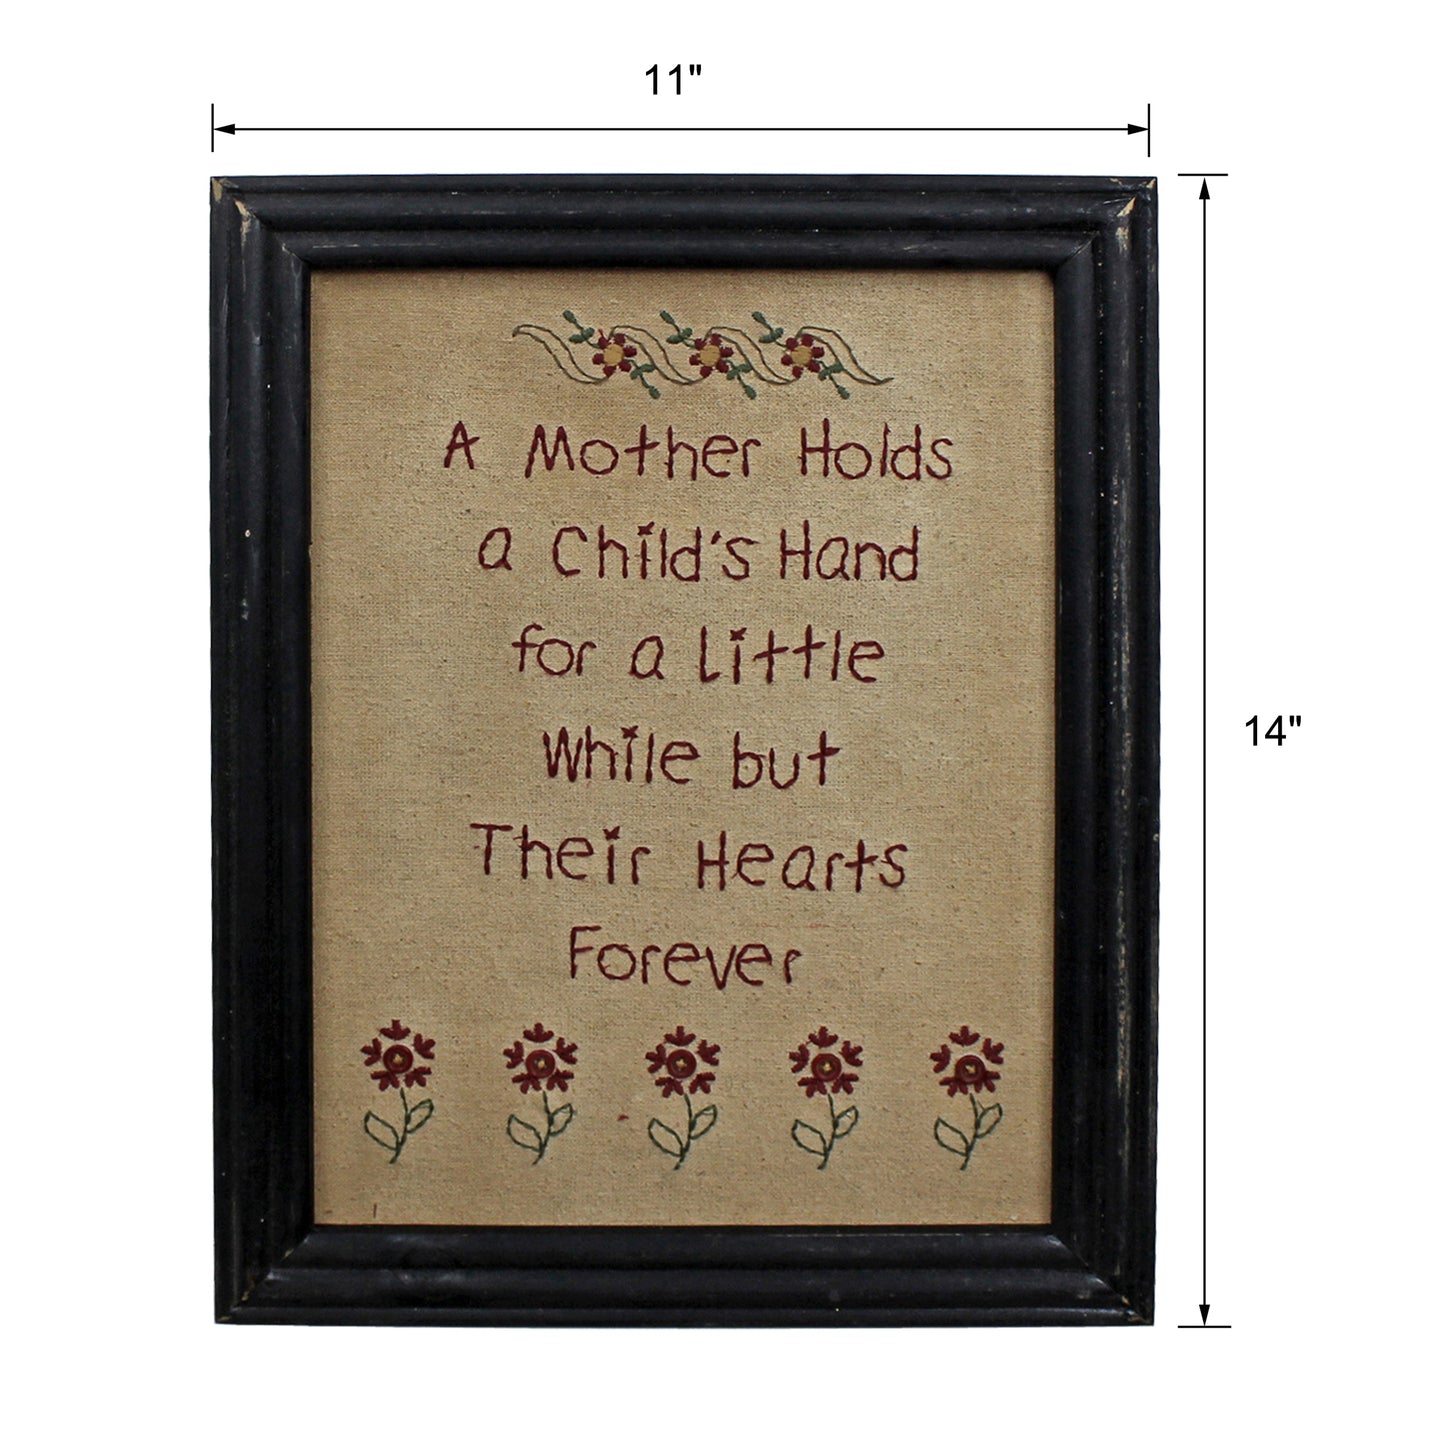 CVHOMEDECO. Primitives Antique A Mother Holds a Child's Hand for a Little While but Their Hearts Forever Stitchery Frame Wall Mounted Hanging Decor Art, 11 x 14 Inch